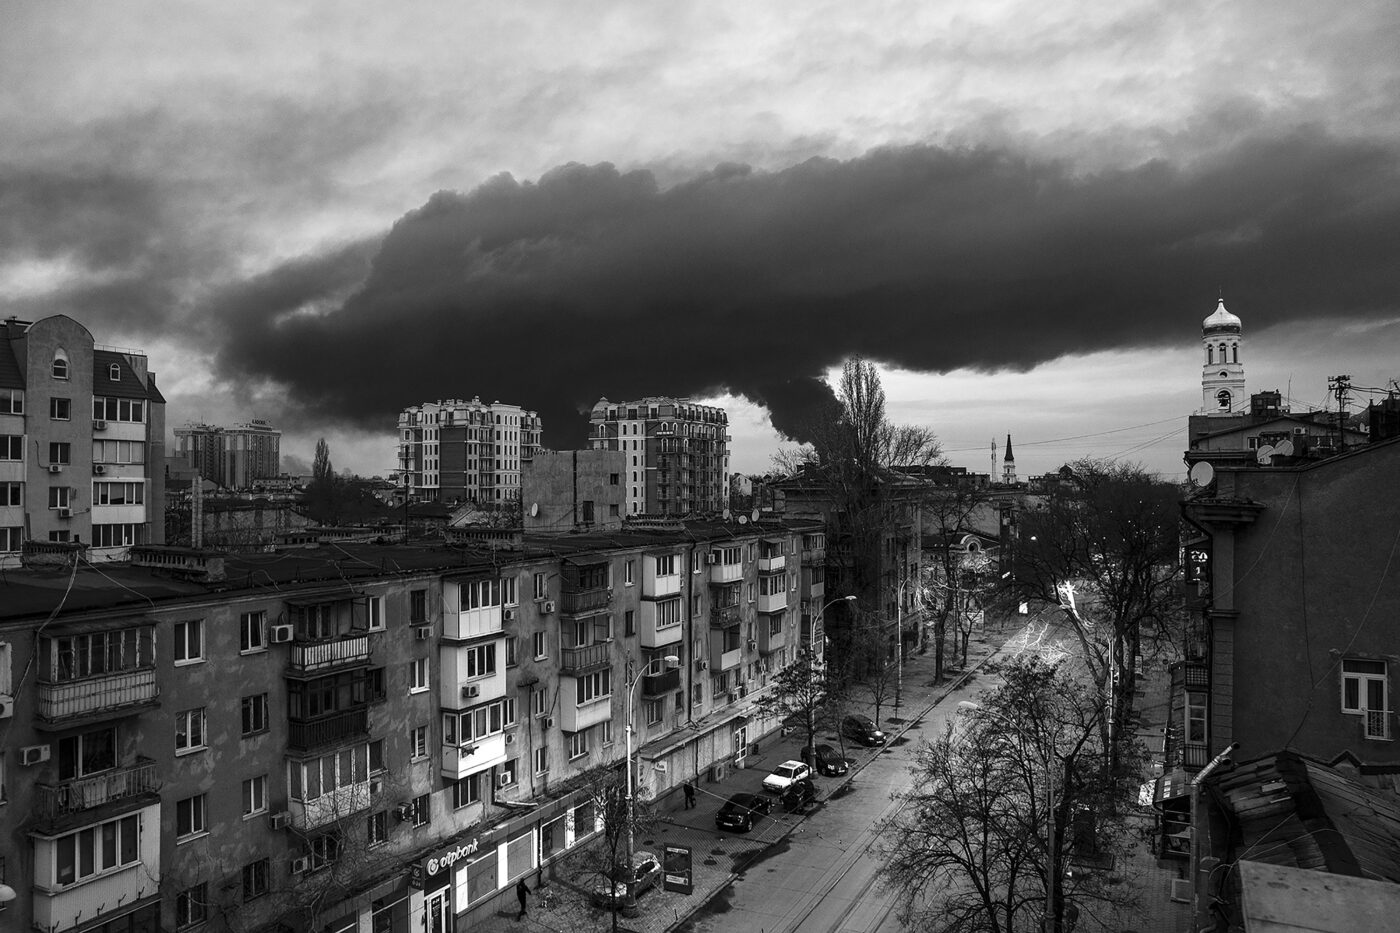 Dark cloud of smoke over a black and white city.